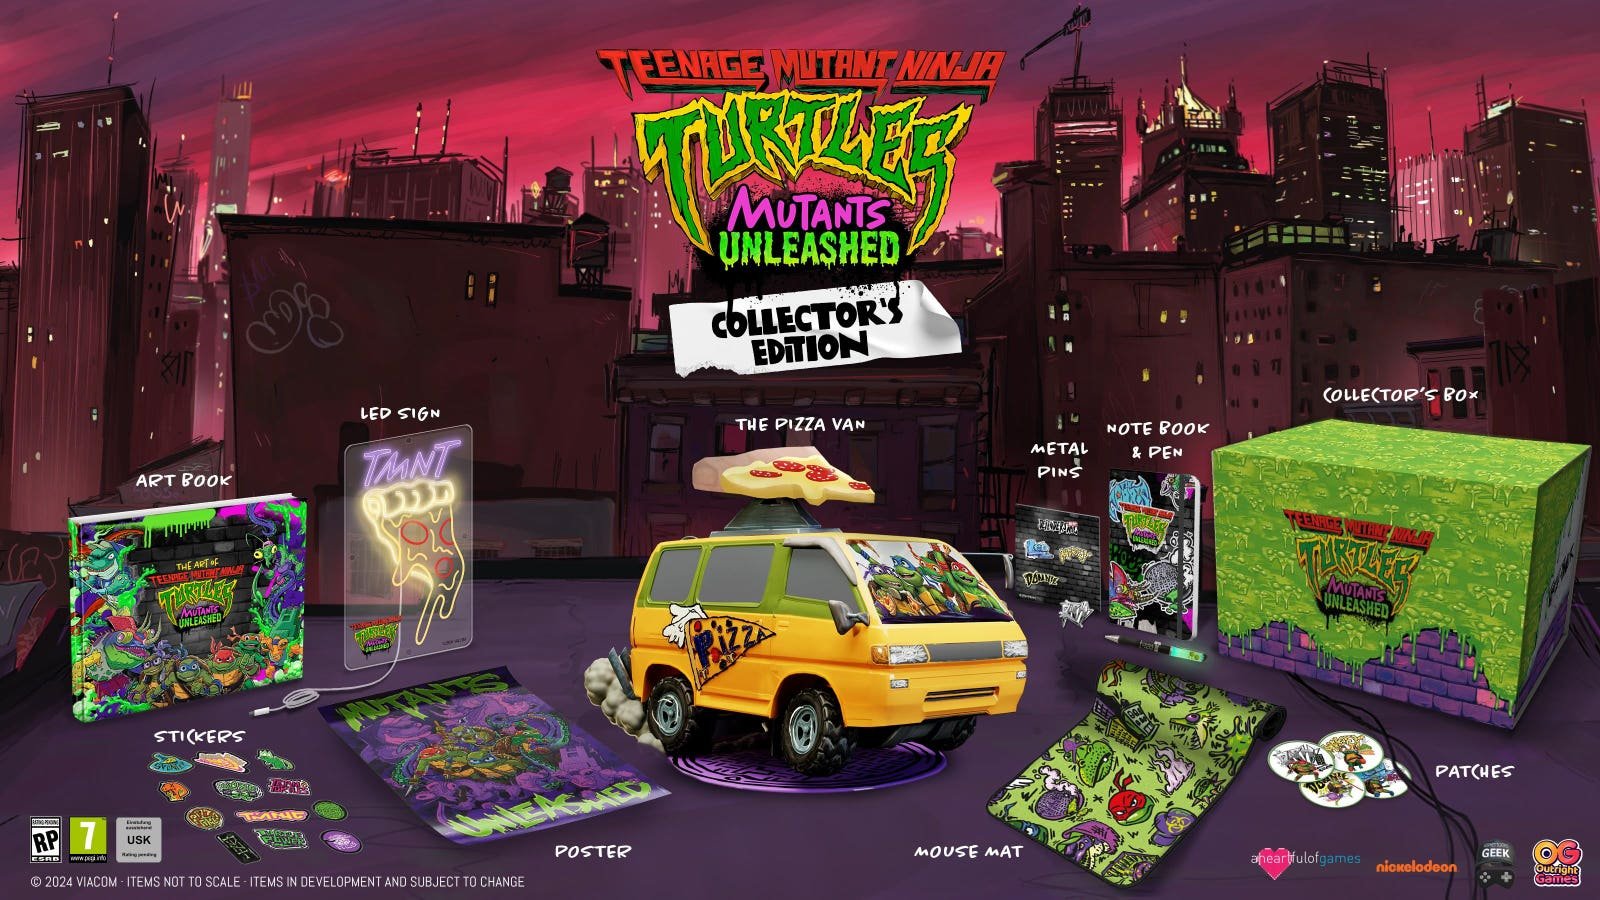 Mutants Unleashed’ Unveils Tubular Collector’s Edition